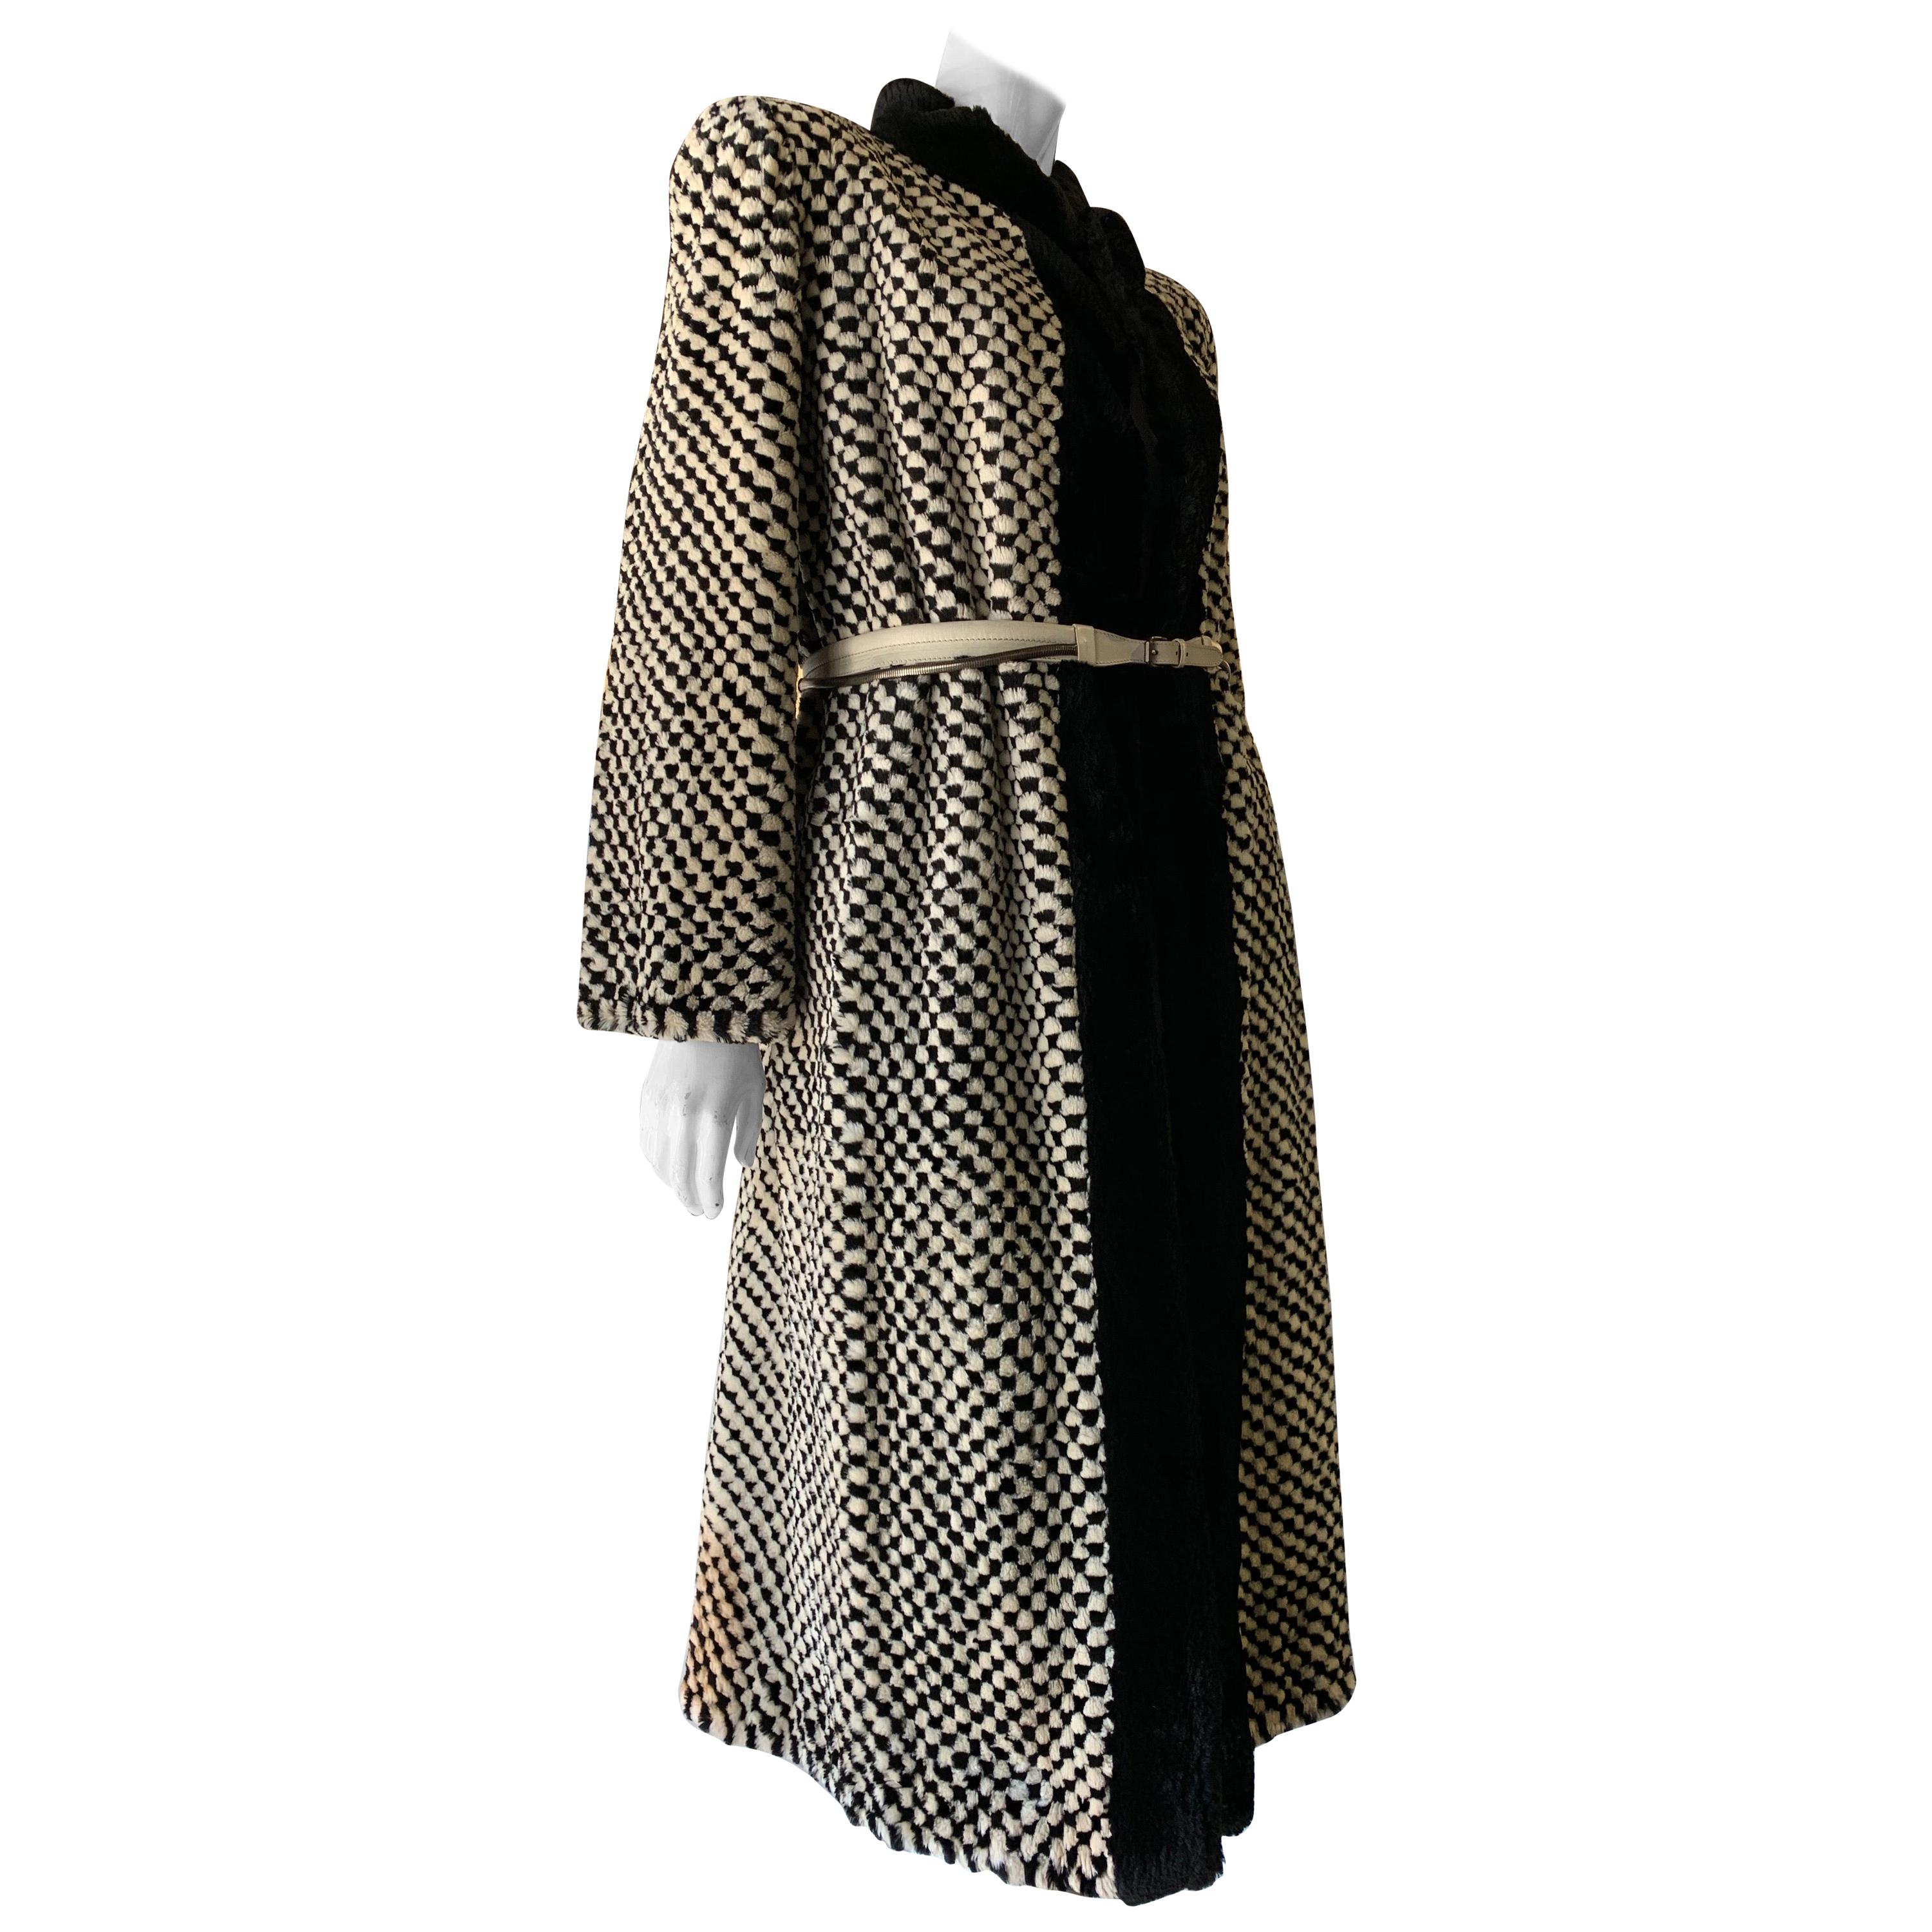 1980s Givenchy Couture Checkerboard Sheared Beaver Coat W/ Black Fur Front Trim